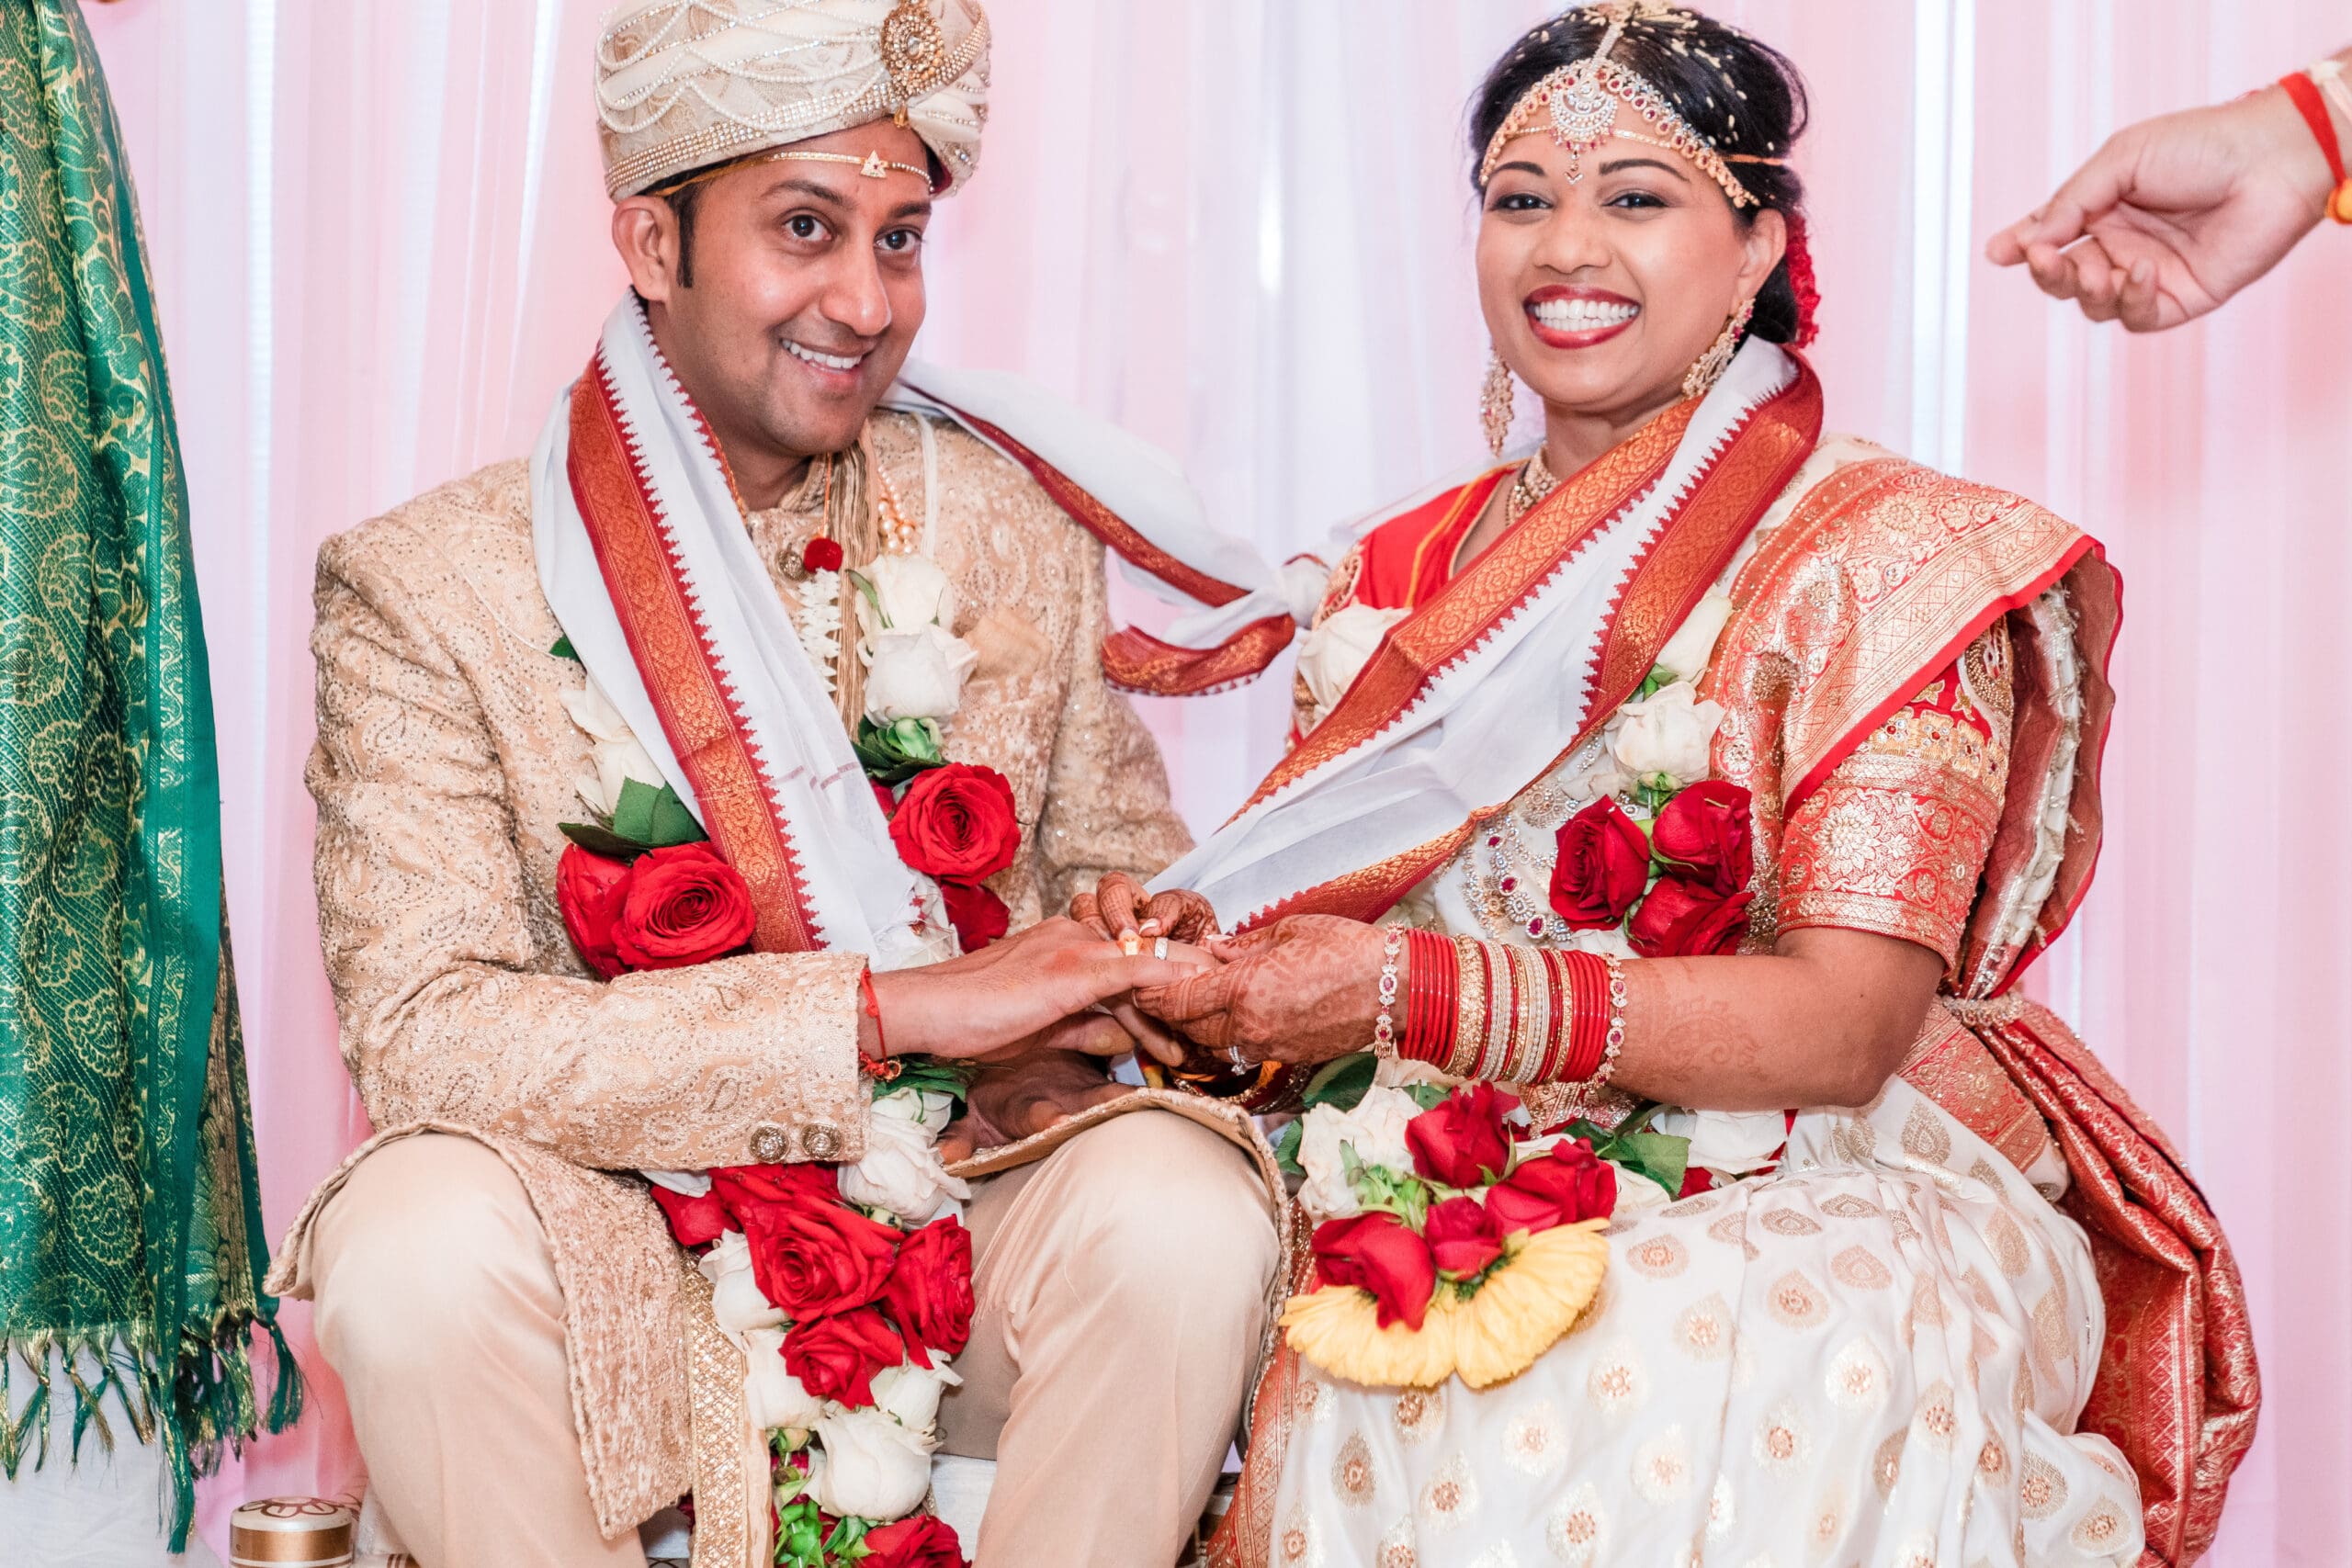 Newlywed couple in traditional Indian wedding attire embracing each other with big smiles.